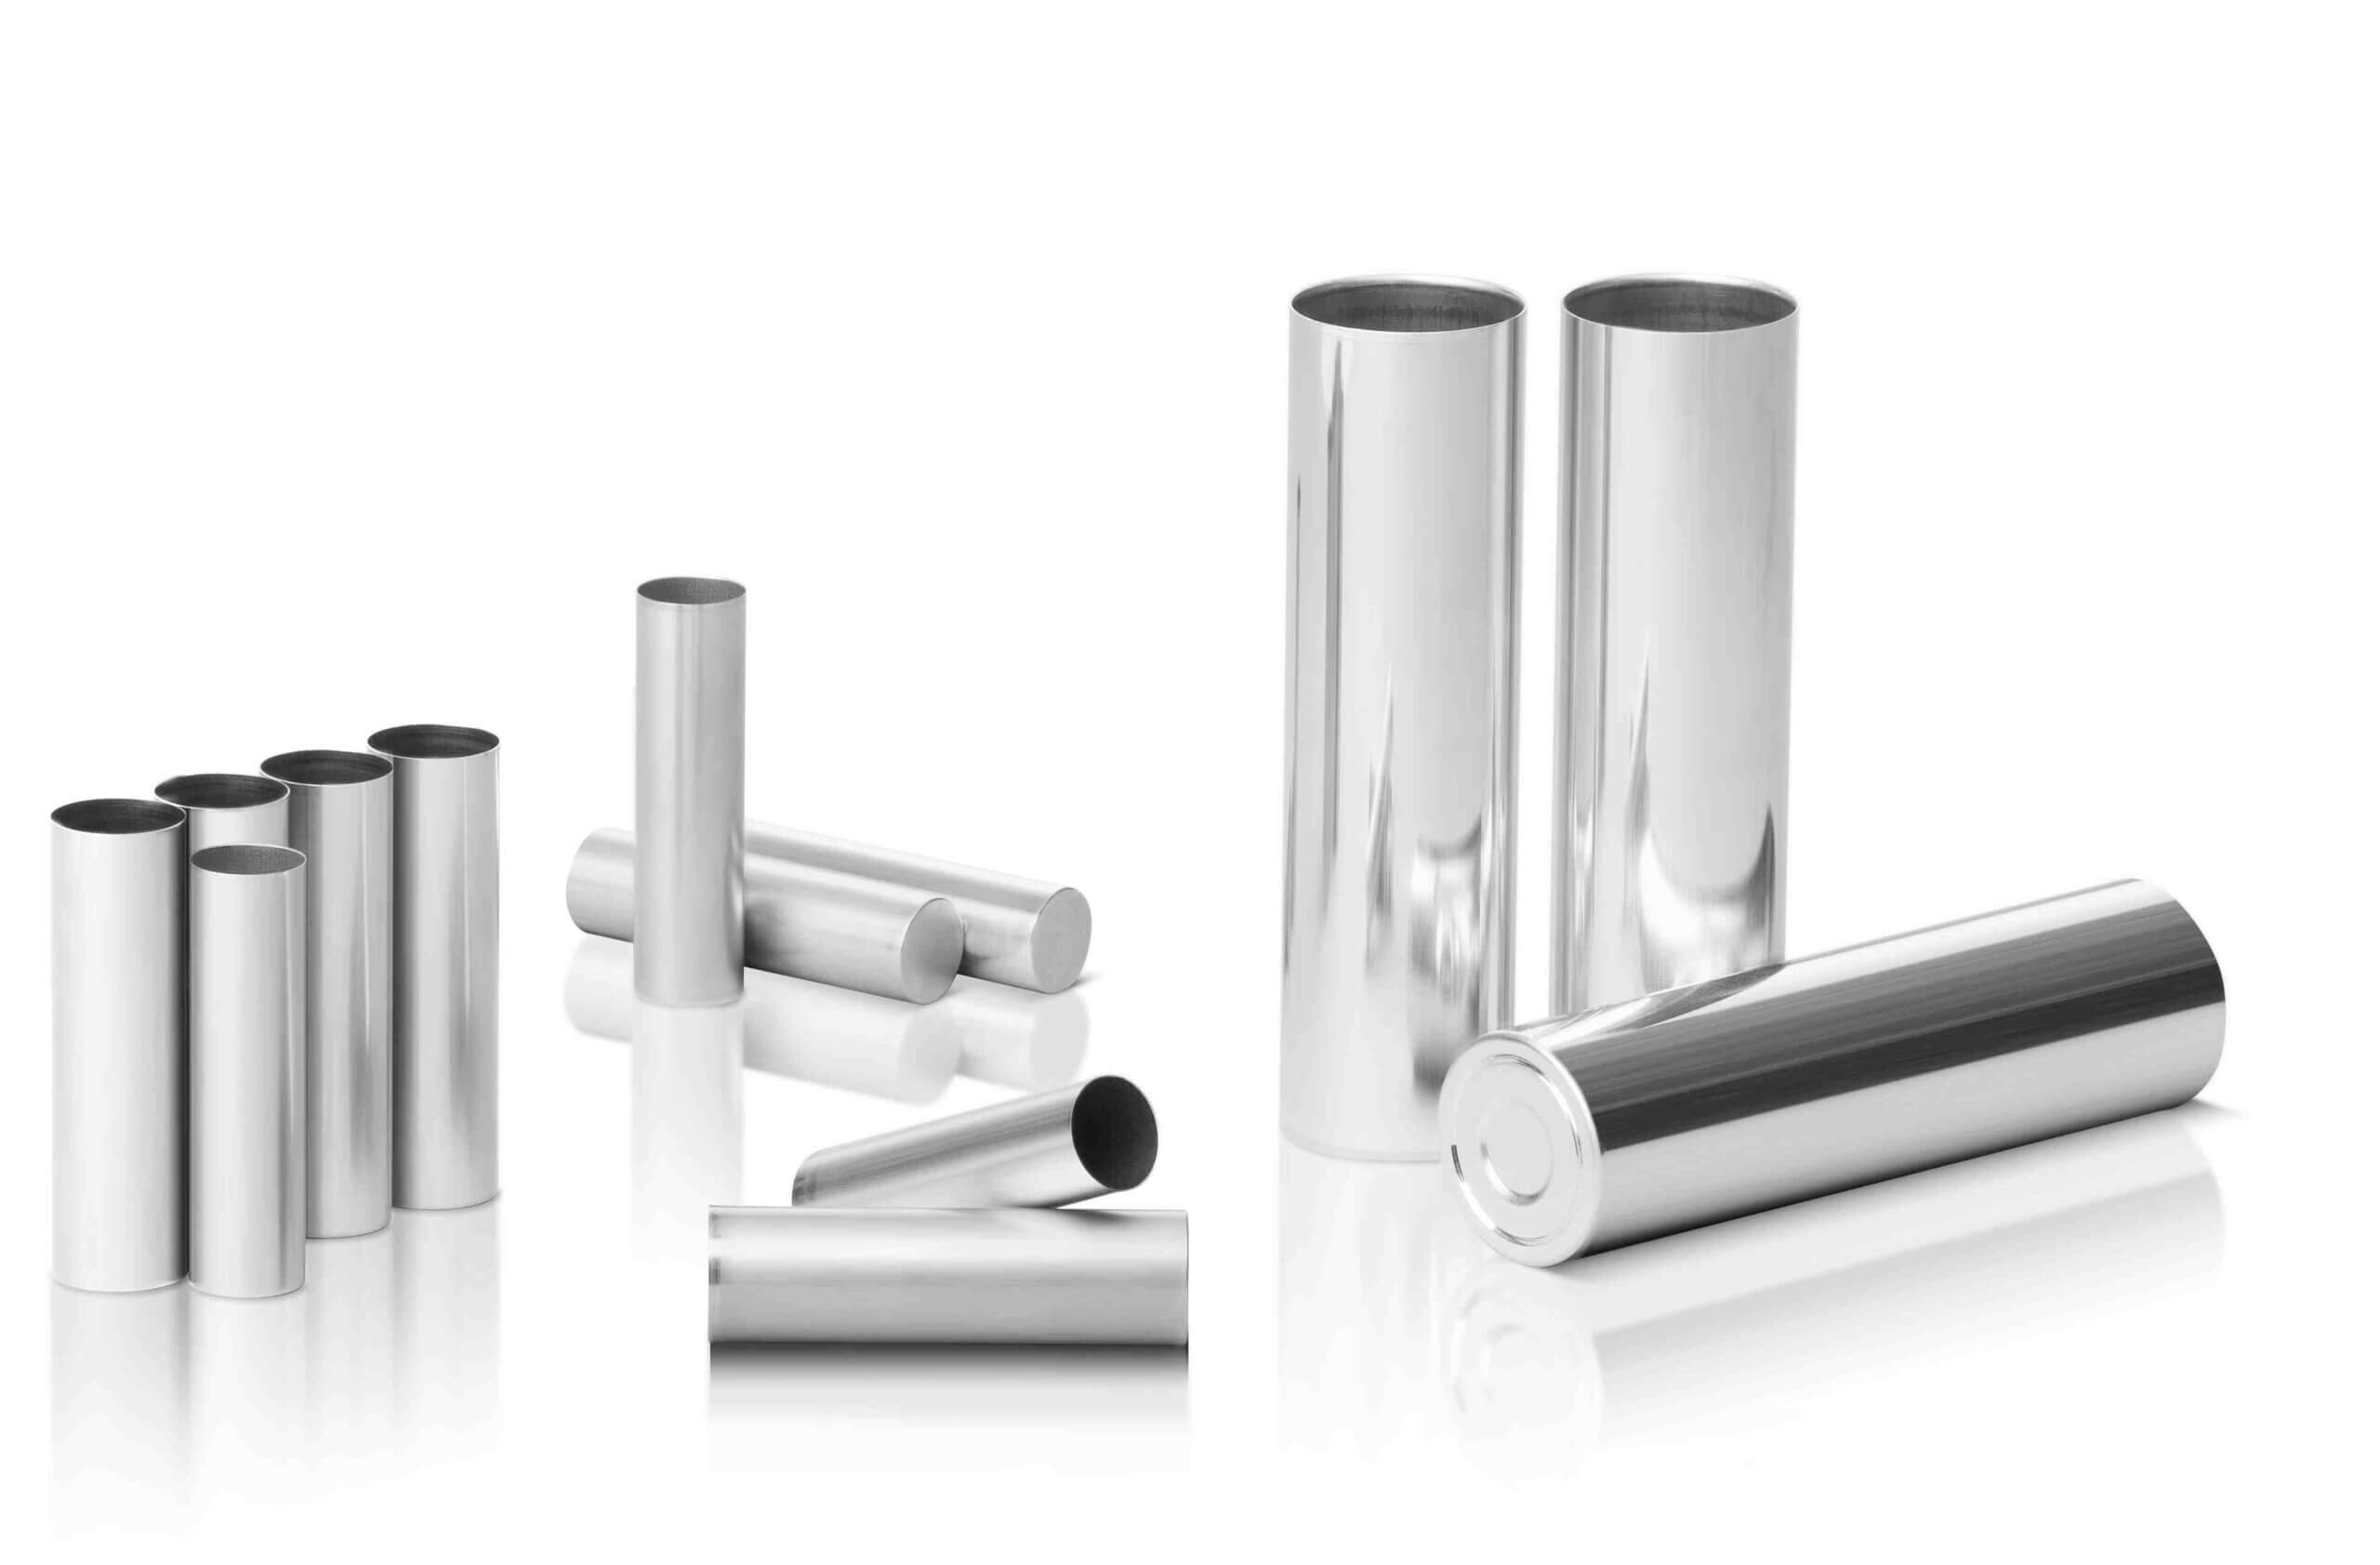 Cylindrical battery cans for the EV market